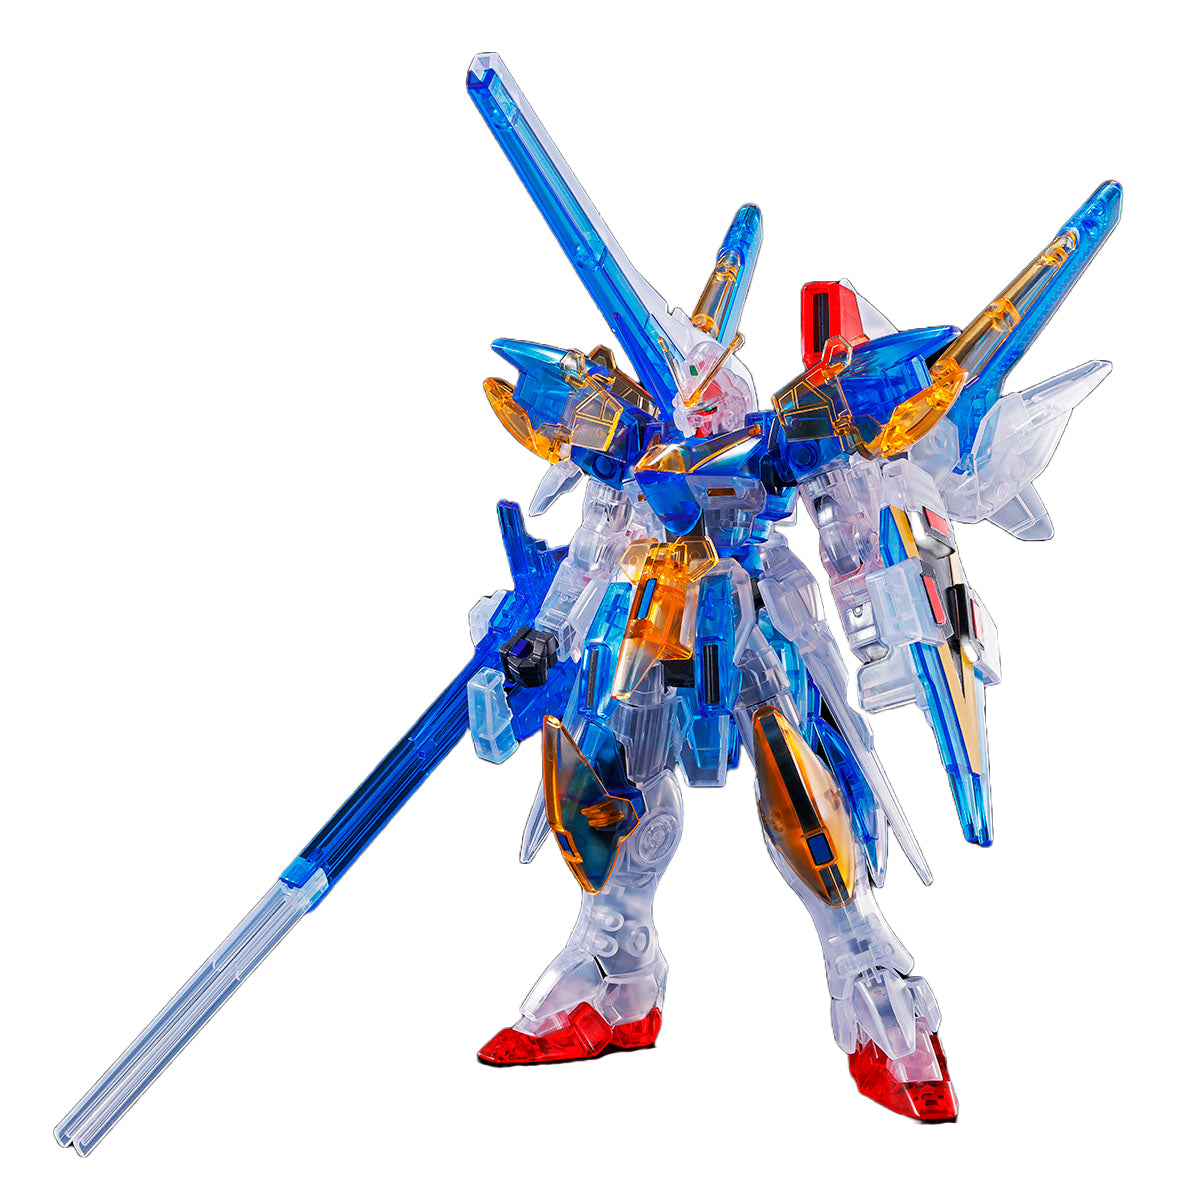 PREVENTA HG 1/144 Victory Two Assault Buster [Clear color] Gundam